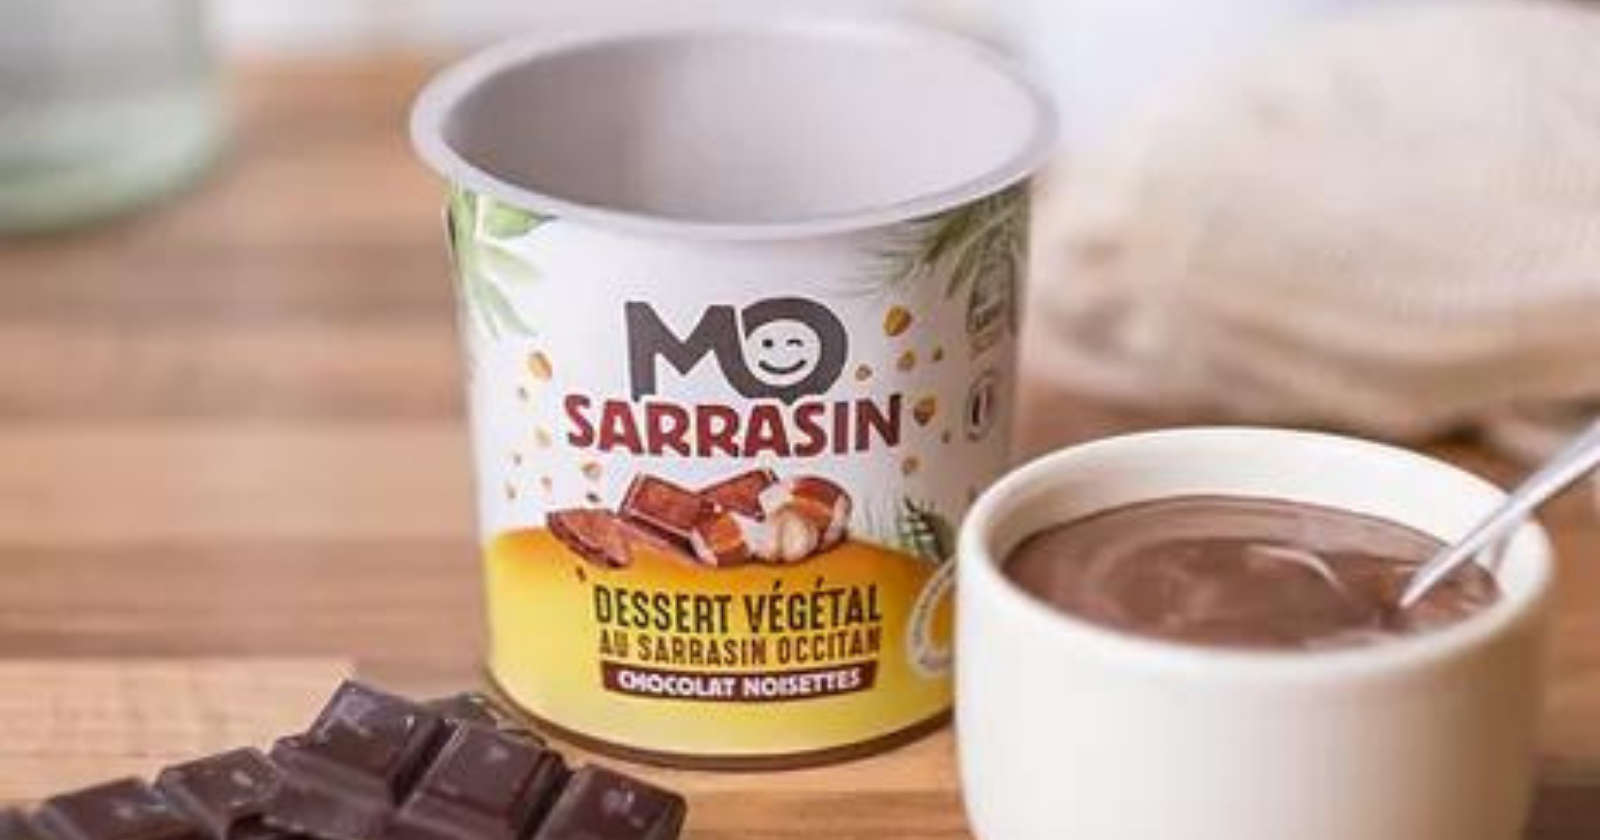 Morice launches "MoSarrasin", a vegetable and chocolate dessert made from buckwheat